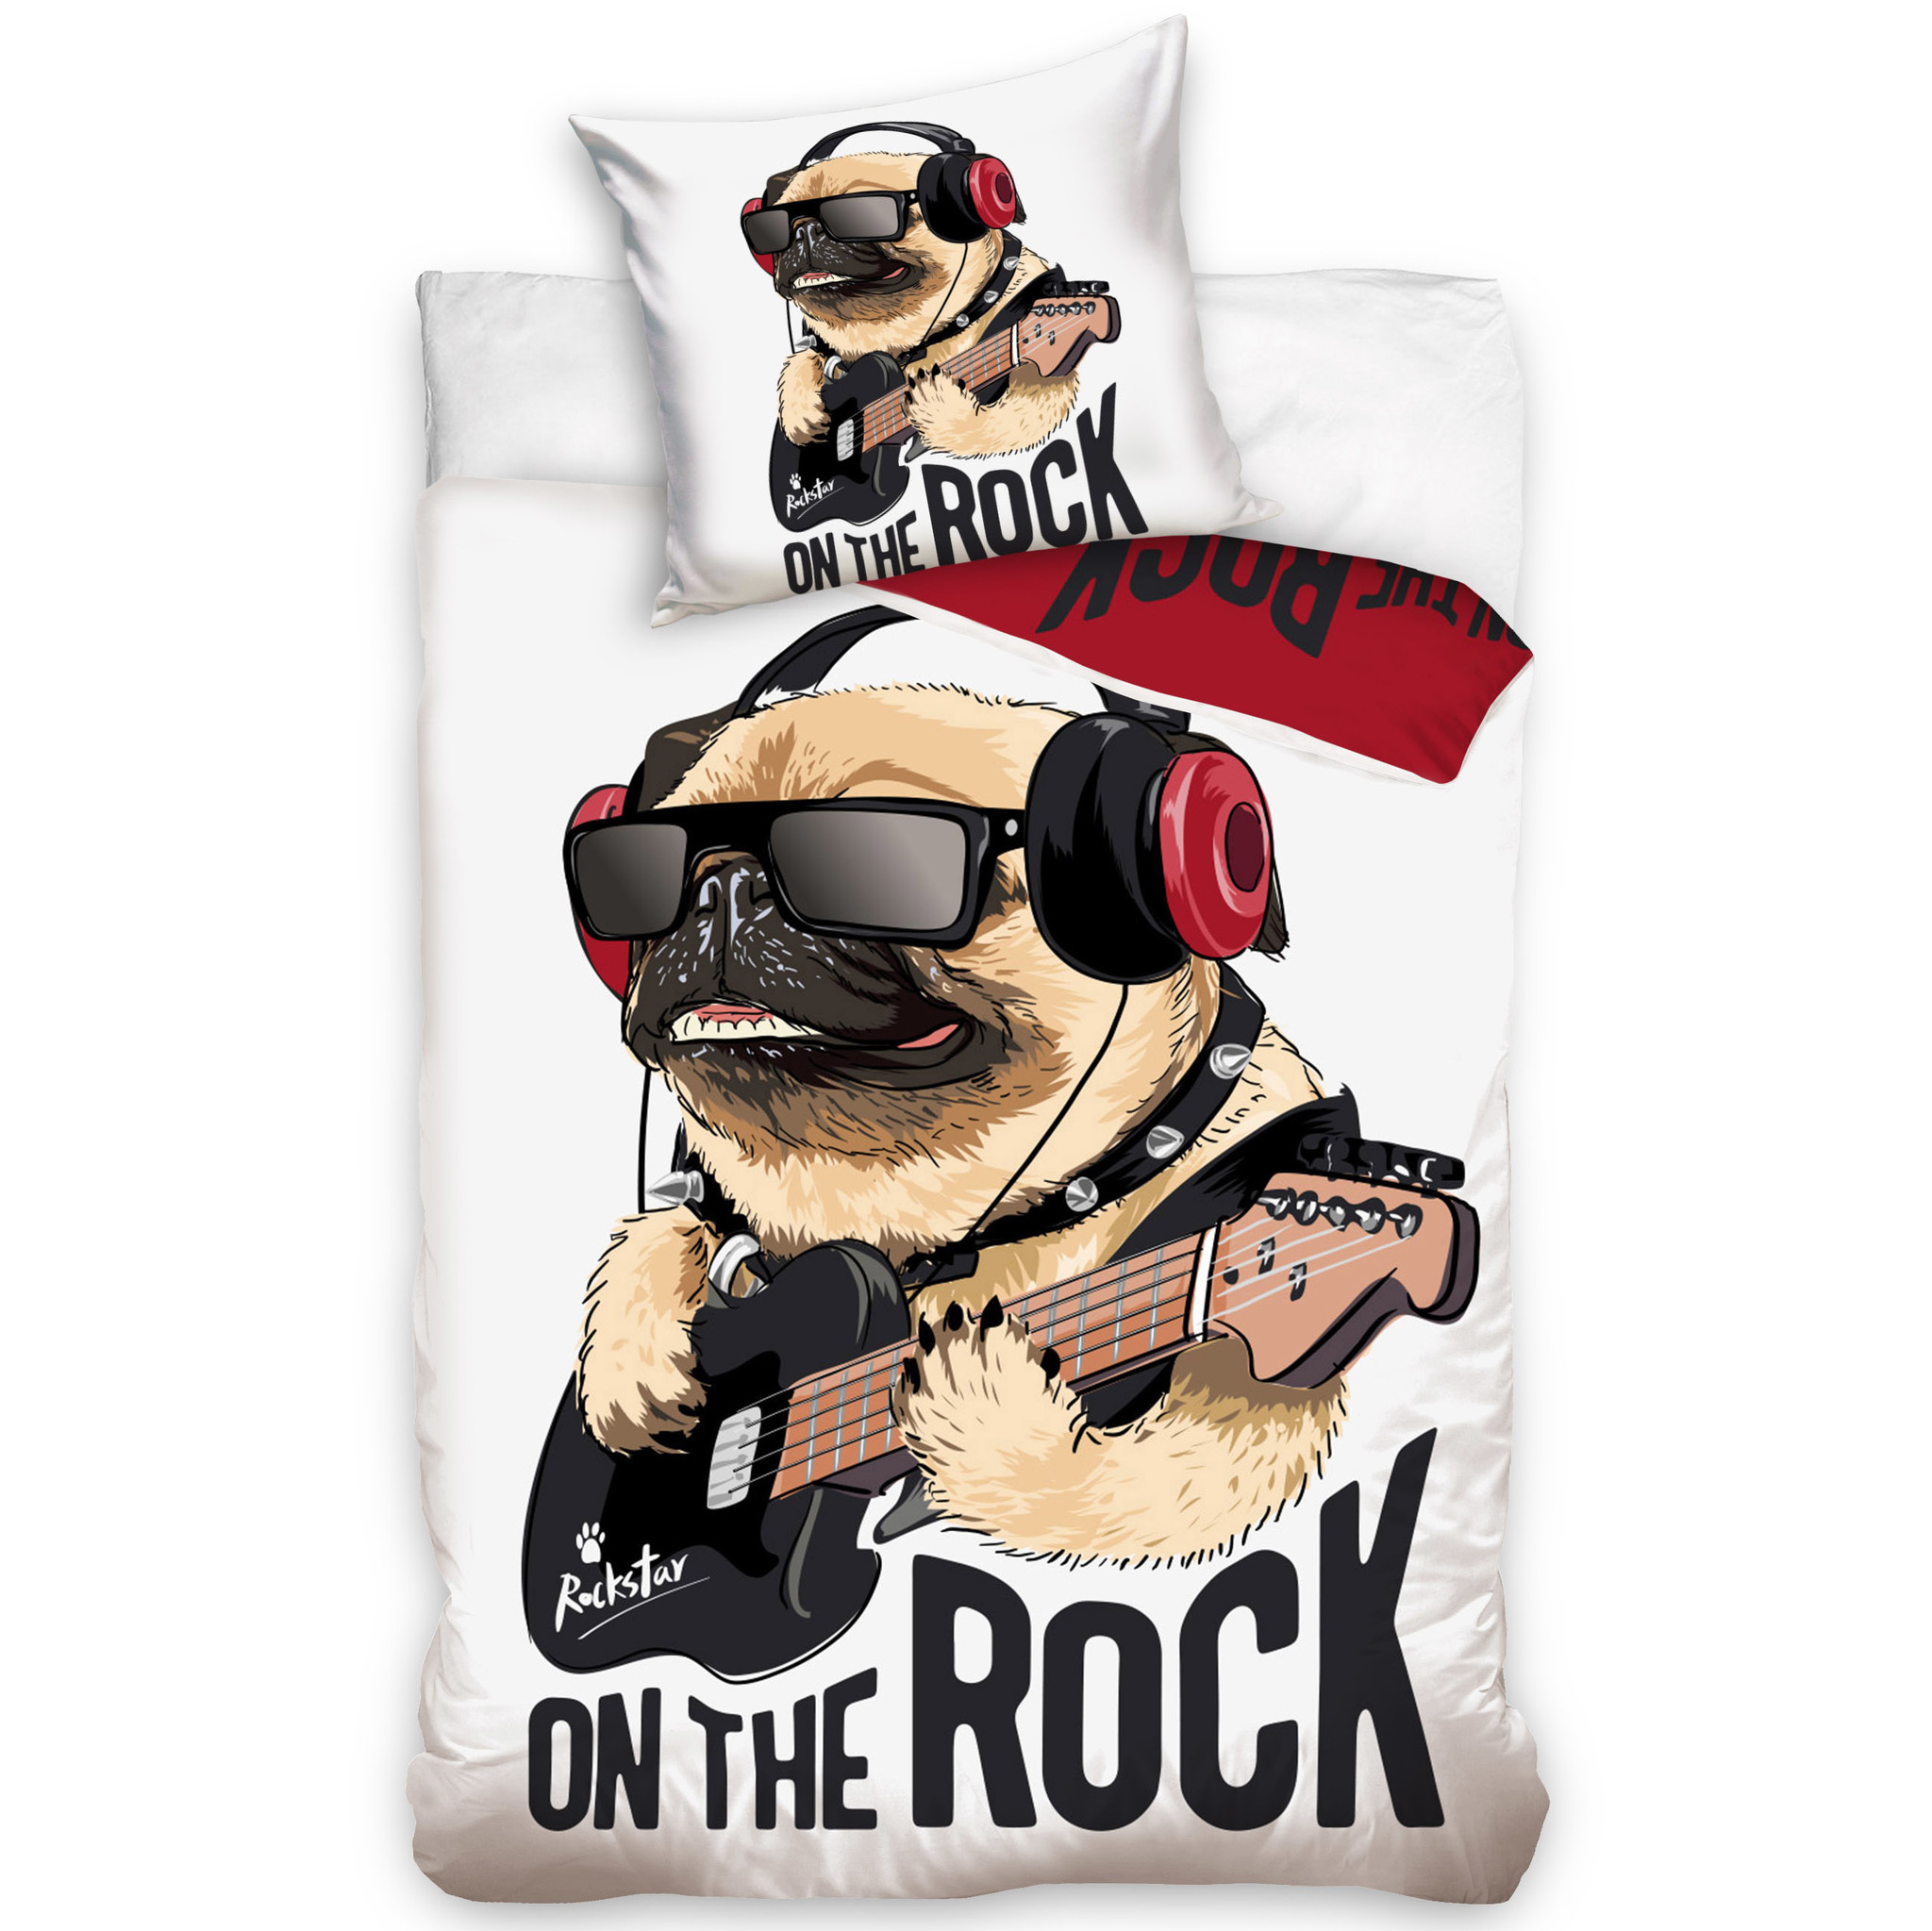 Animal Pictures Duvet cover On The Rock - Single - 140 x 200 cm - Cotton